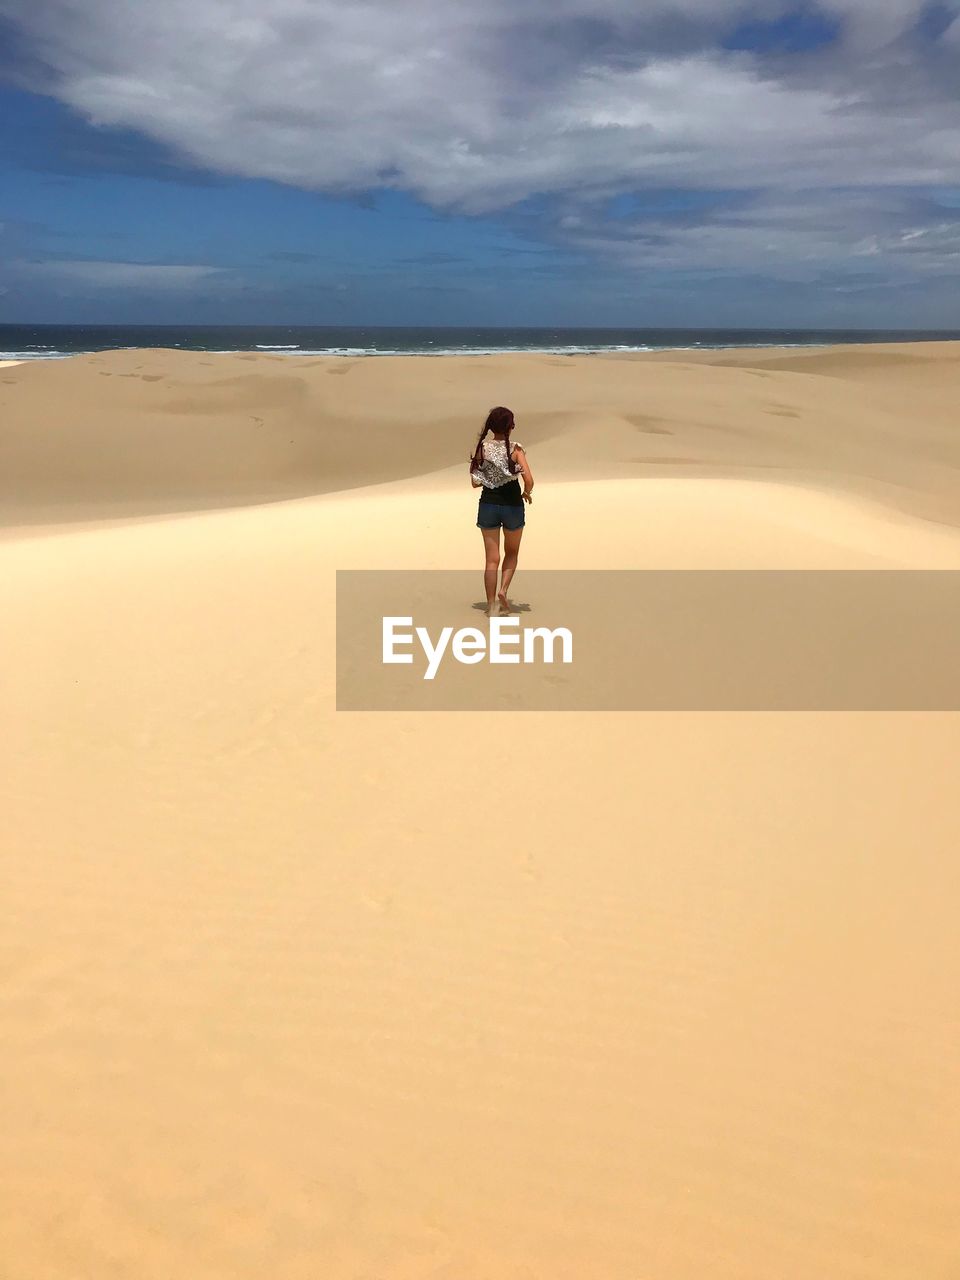 Rear view of woman running on sand dune at beach against cloudy sky